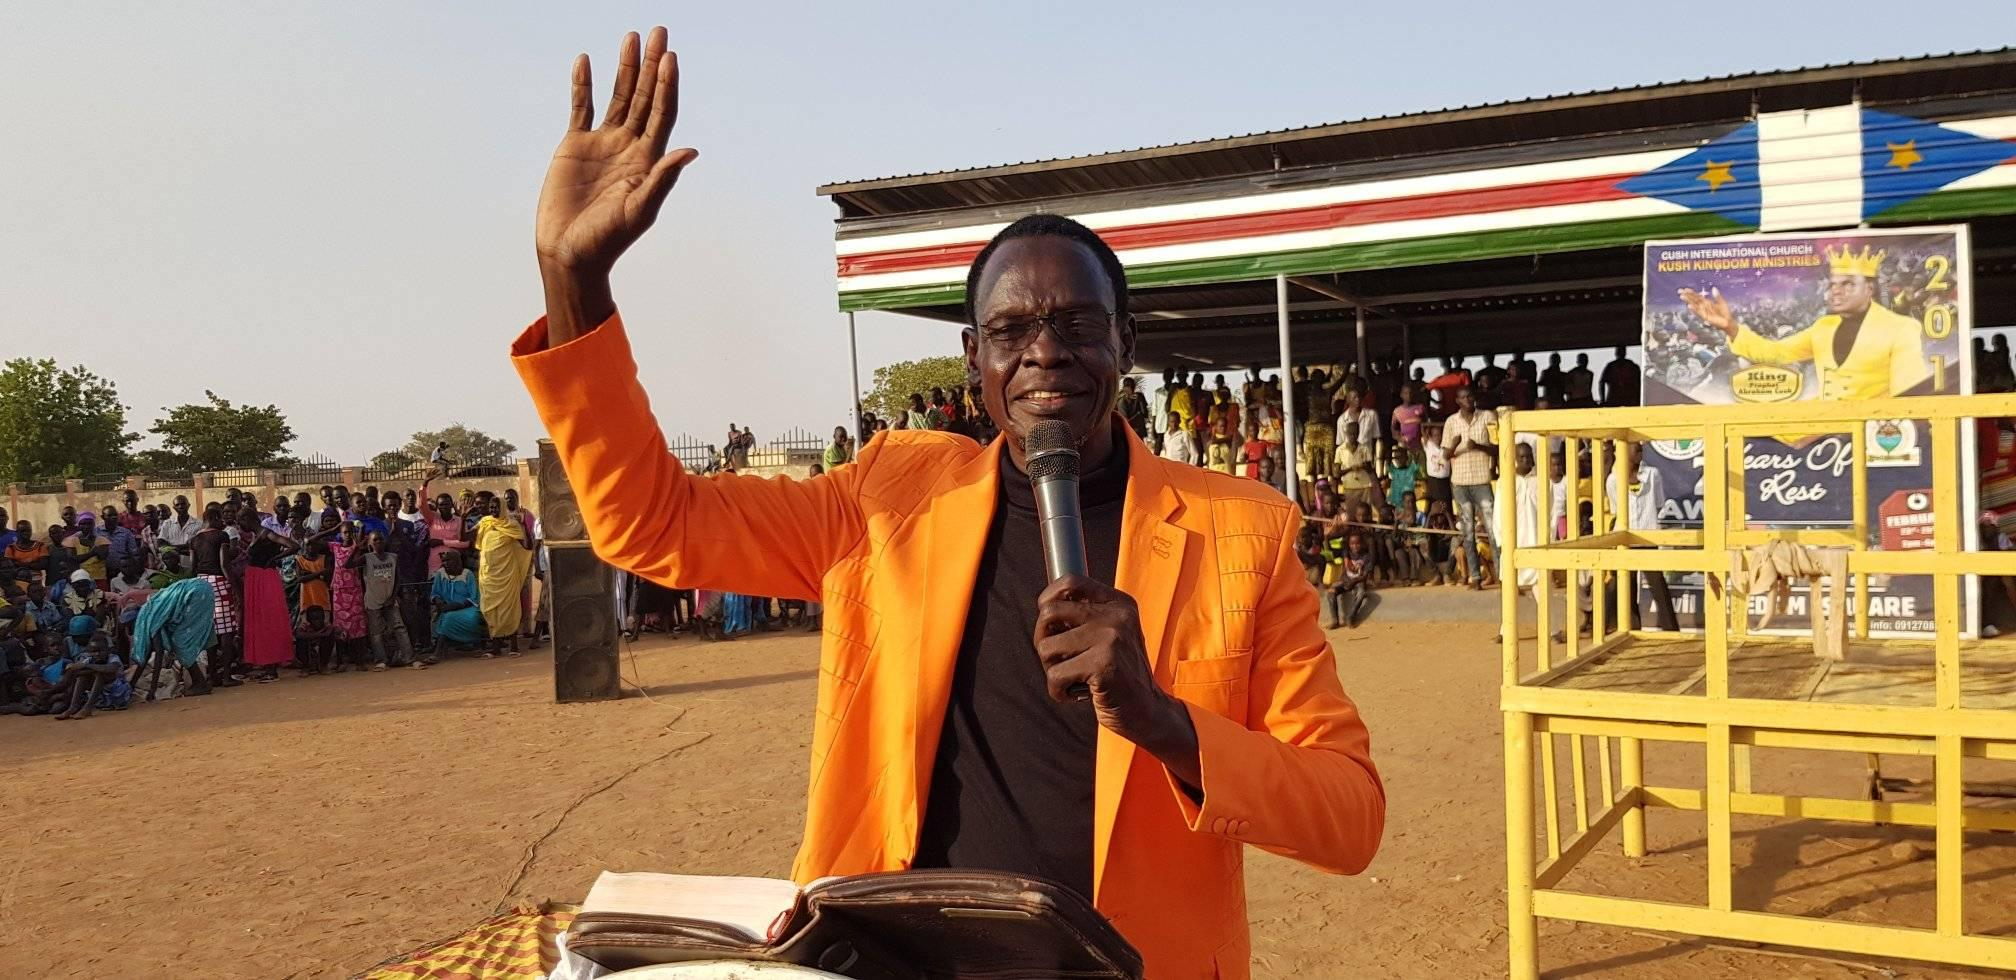 After 28 days of hunger strike, Abraham Chol’s relatives worried about his life